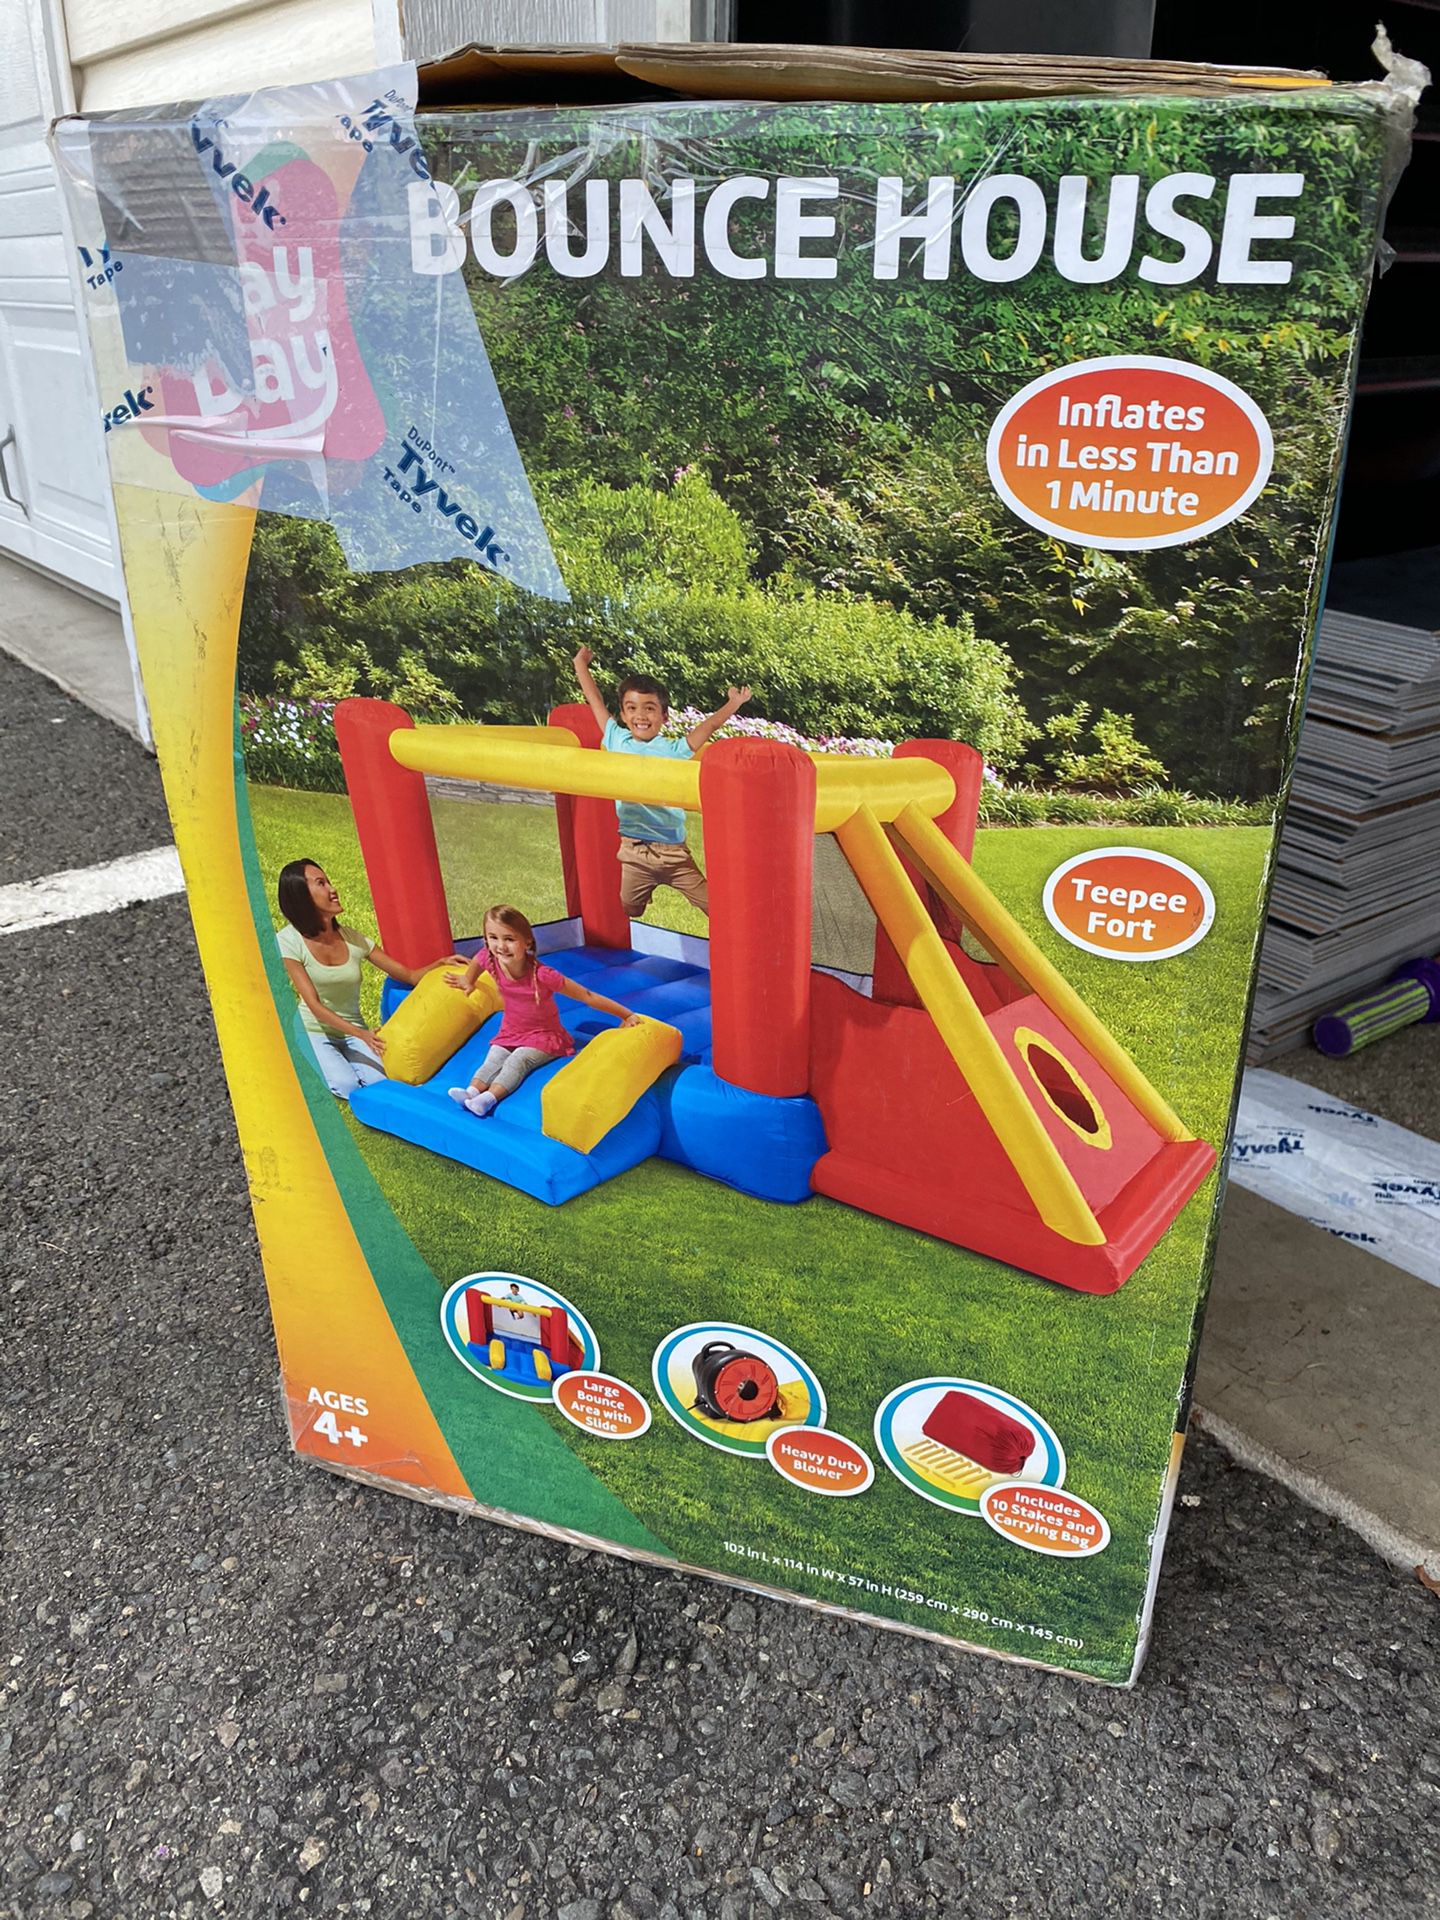 Small bounce house